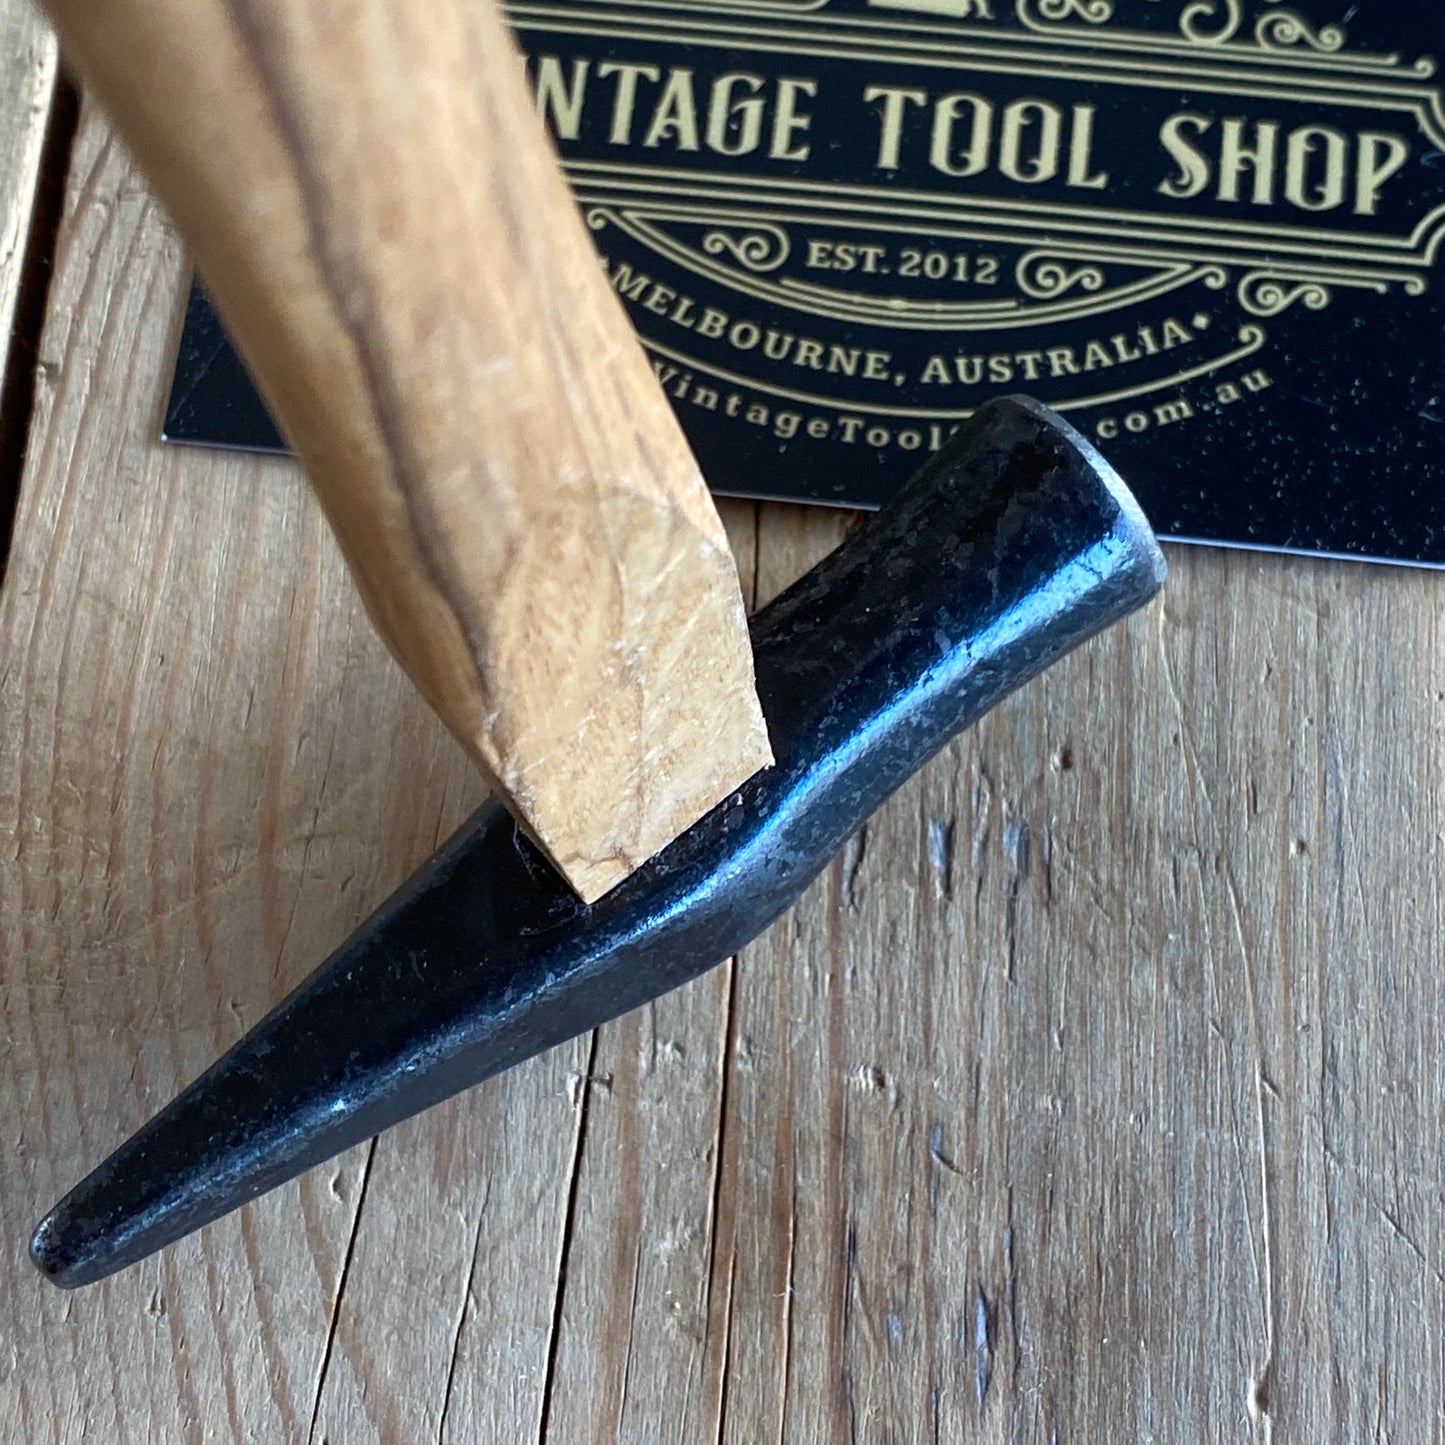 SOLD Vintage JAPANESE JOINERS HAMMER T5457